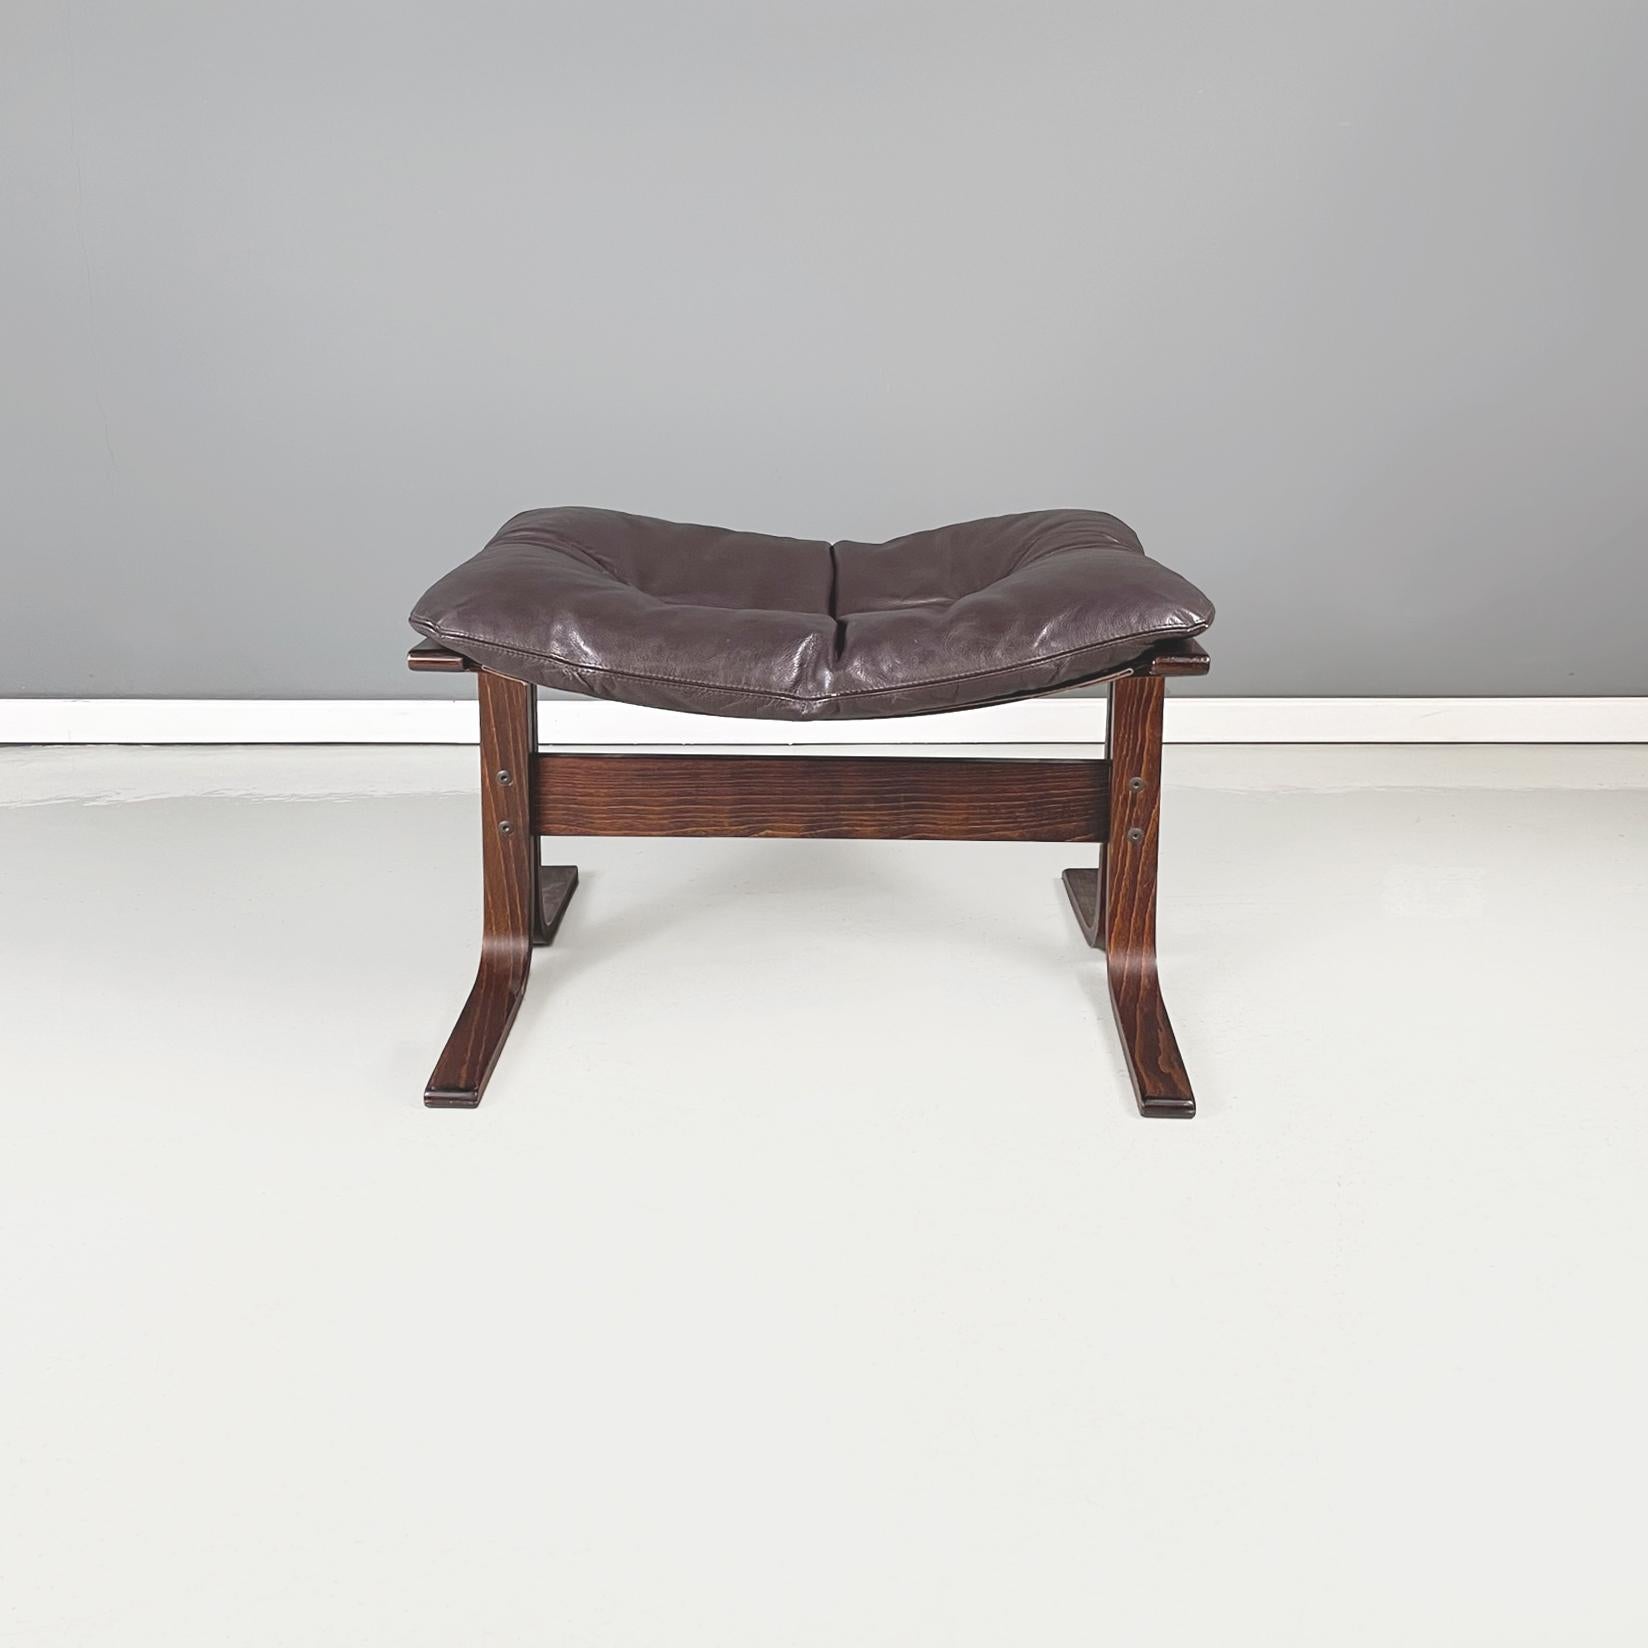 Norway modern Brown leather wood Pouf Siesta by Igmar Relling for Westnofa Furniture, 1970s
Pouf mod. Siesta with rectangular seat in dark brown leather with buttons. The seat is supported by a brown fabric. The structure of the ottoman is made of